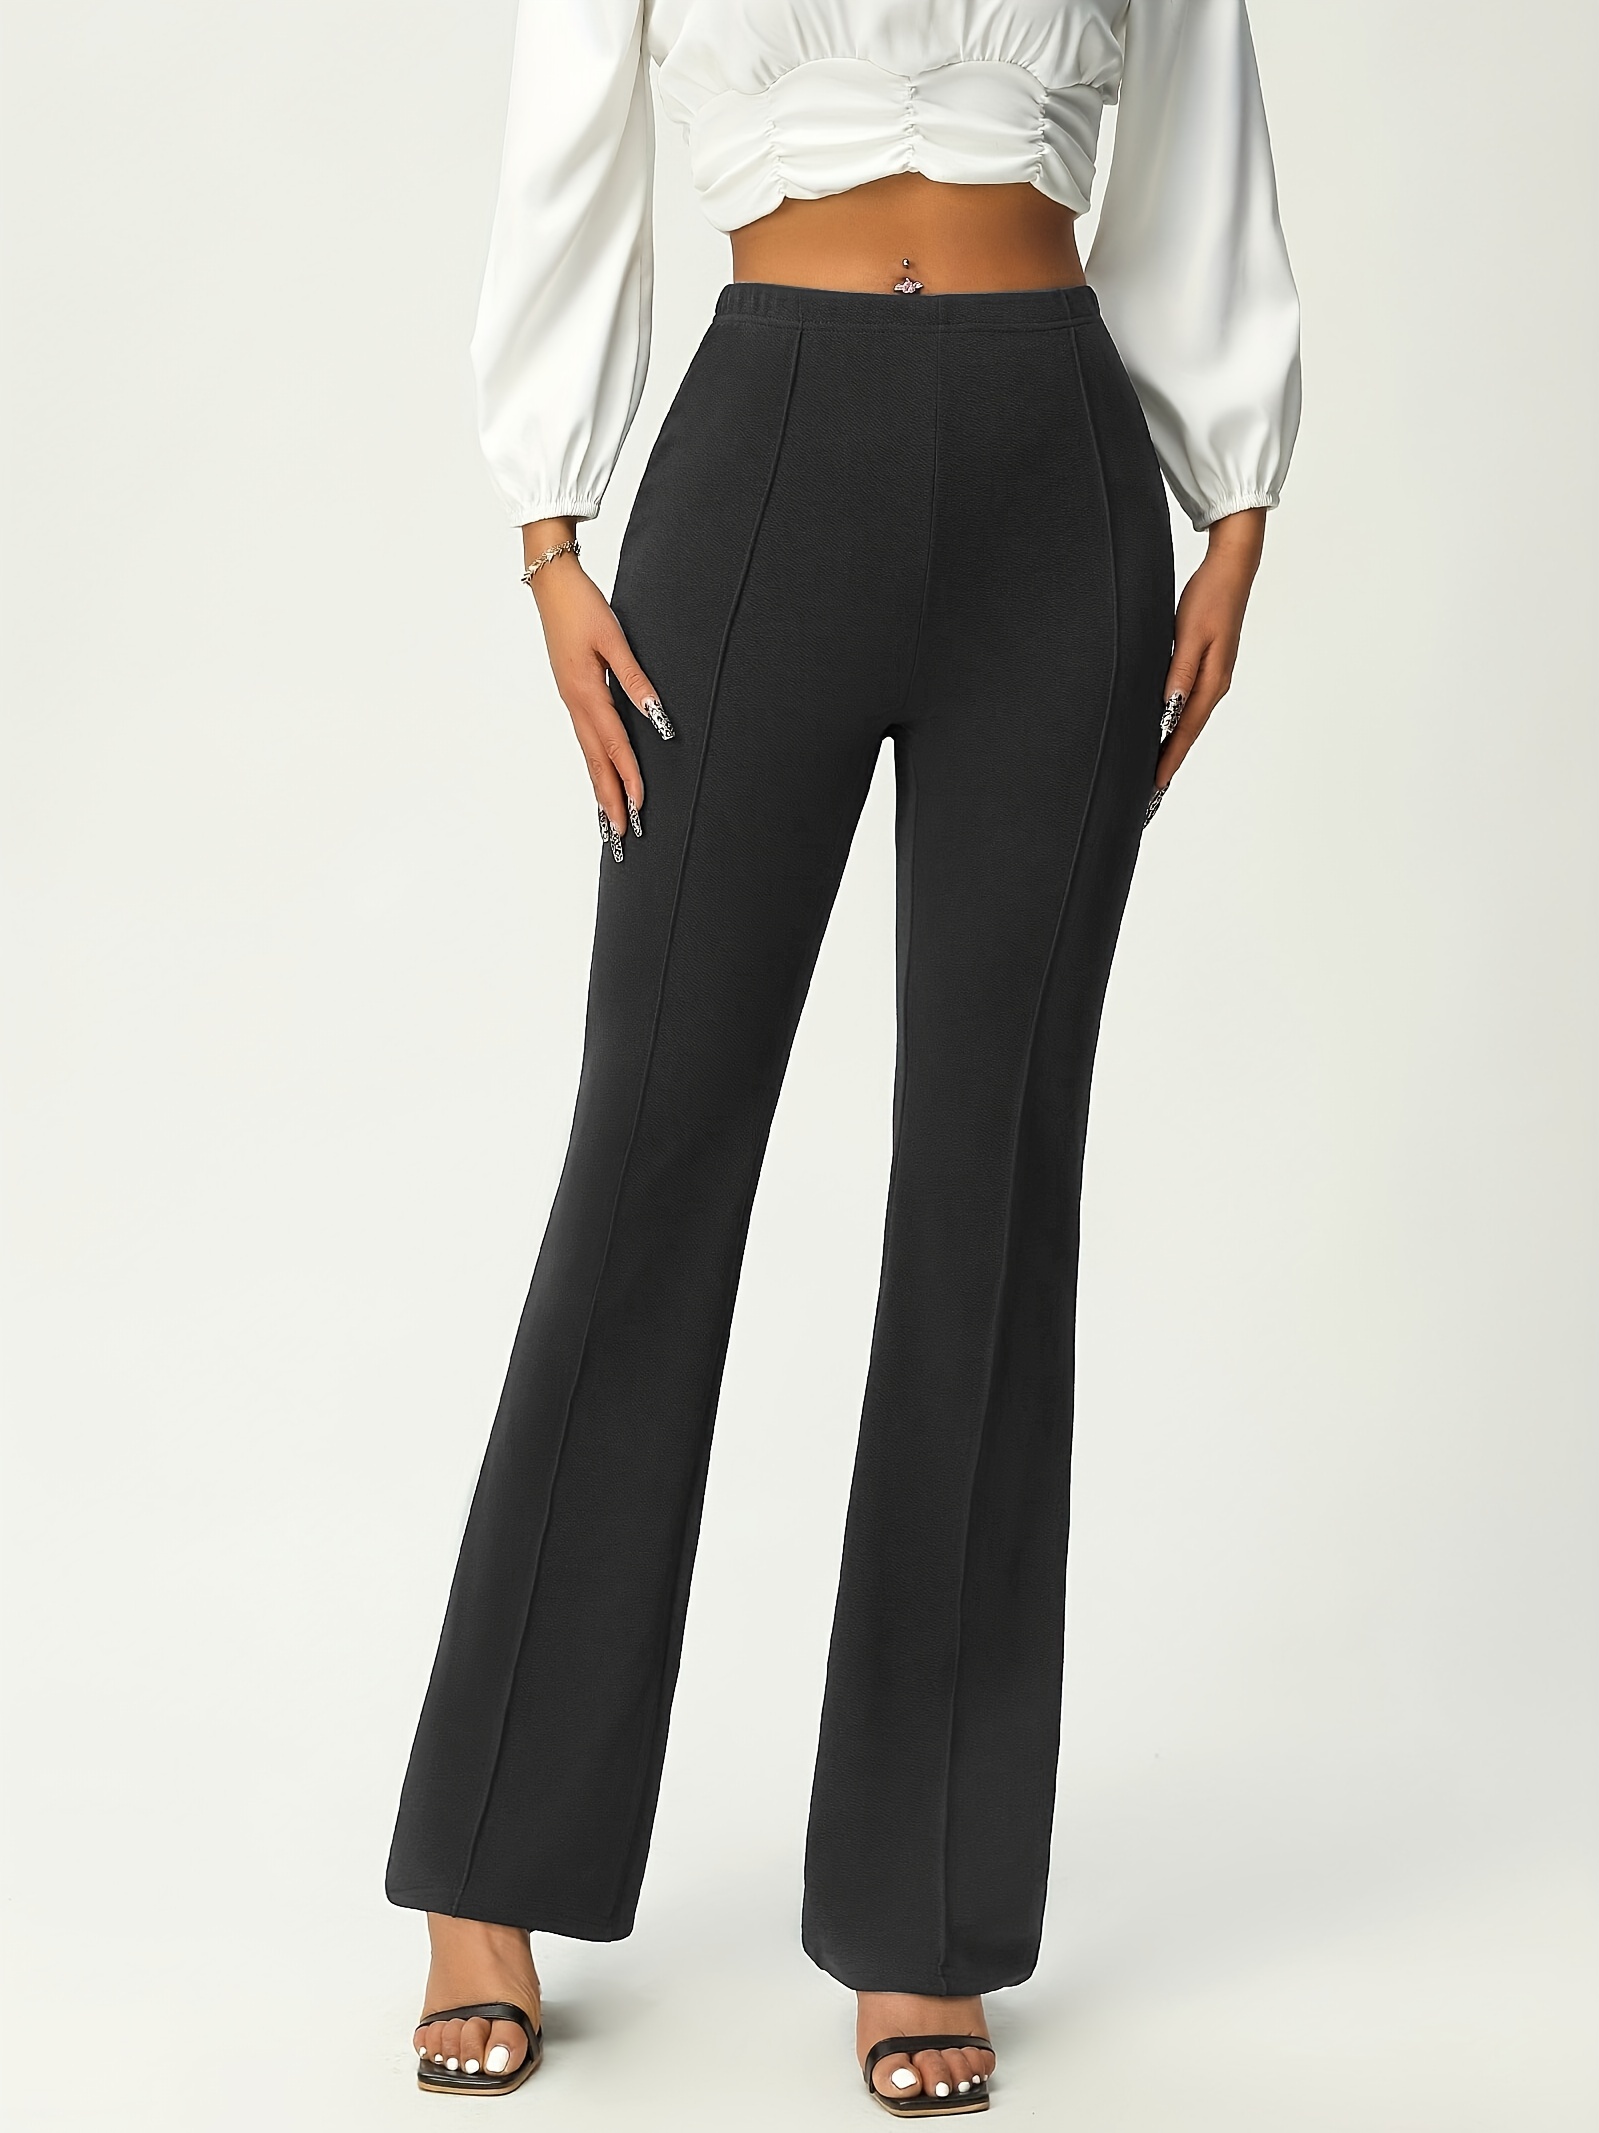 Womens Casual Bell Bottoms with Pockets Fashion Ladies Solid Color Dress  Pants High Waist Office Work Flare Trousers 